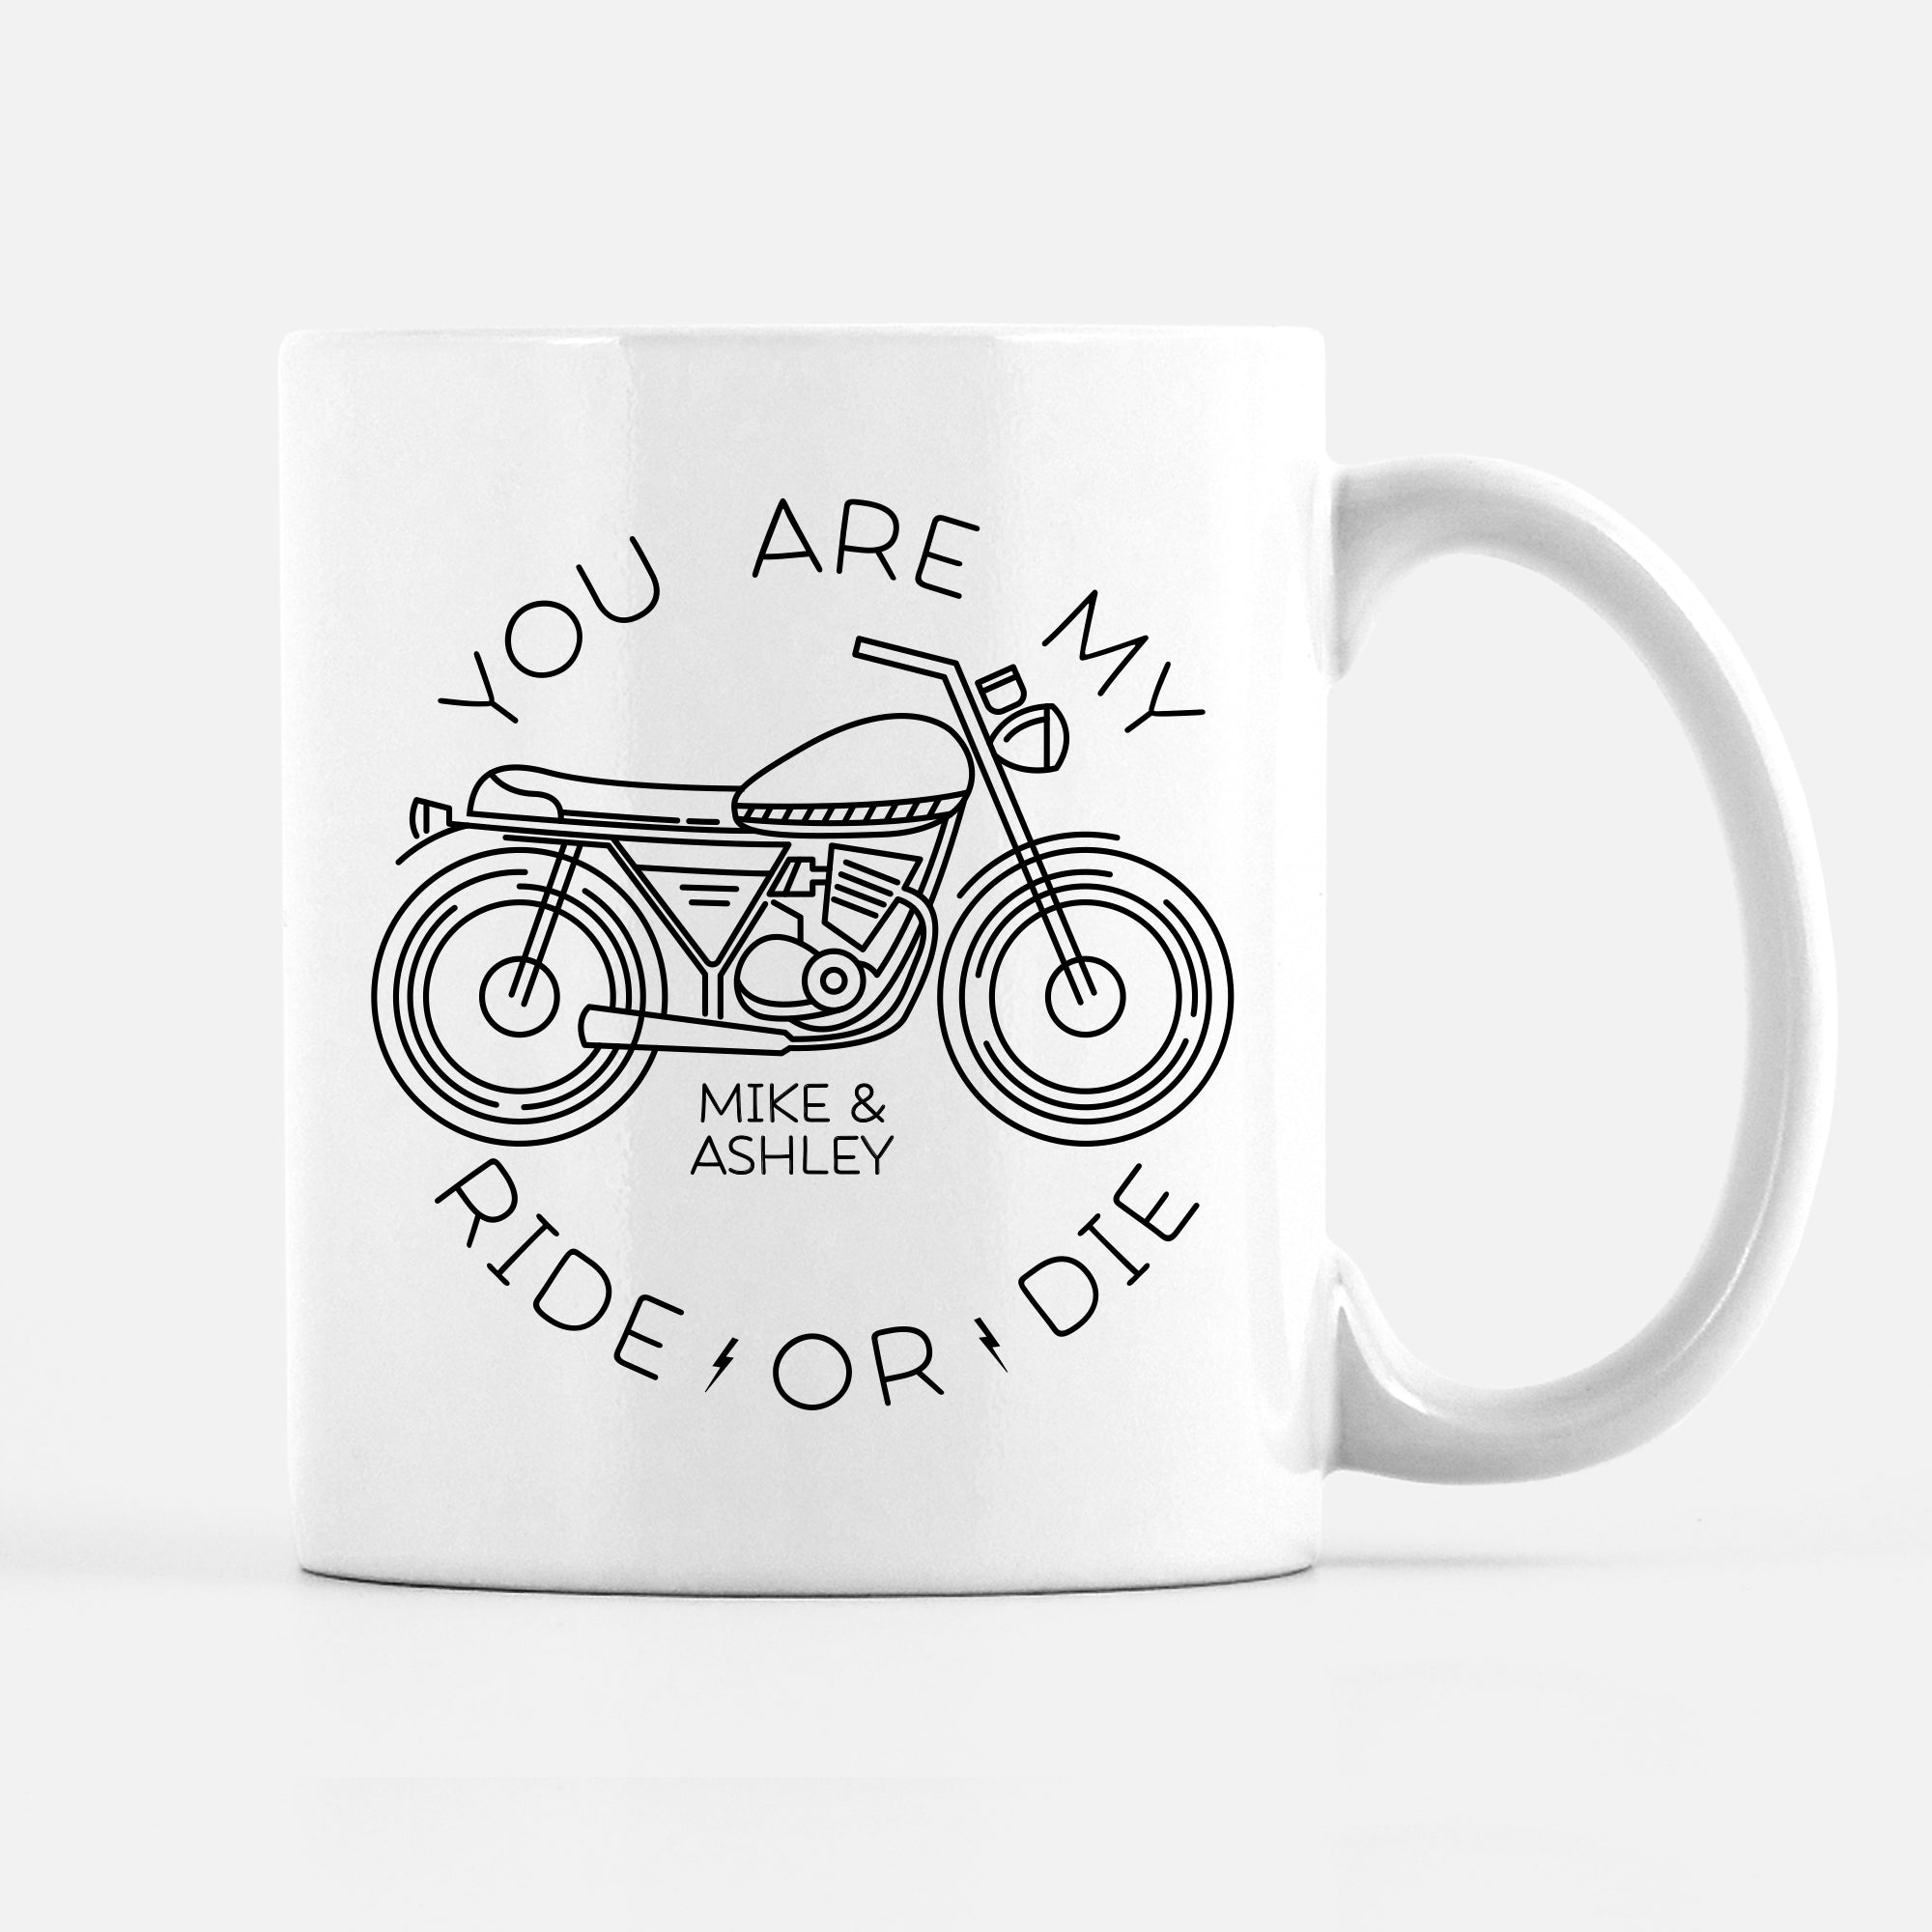 You Are My Ride or Die Mug, Valentine's Day, Couple, Wedding, Engagement, Motorcycle, PIPSY.COM